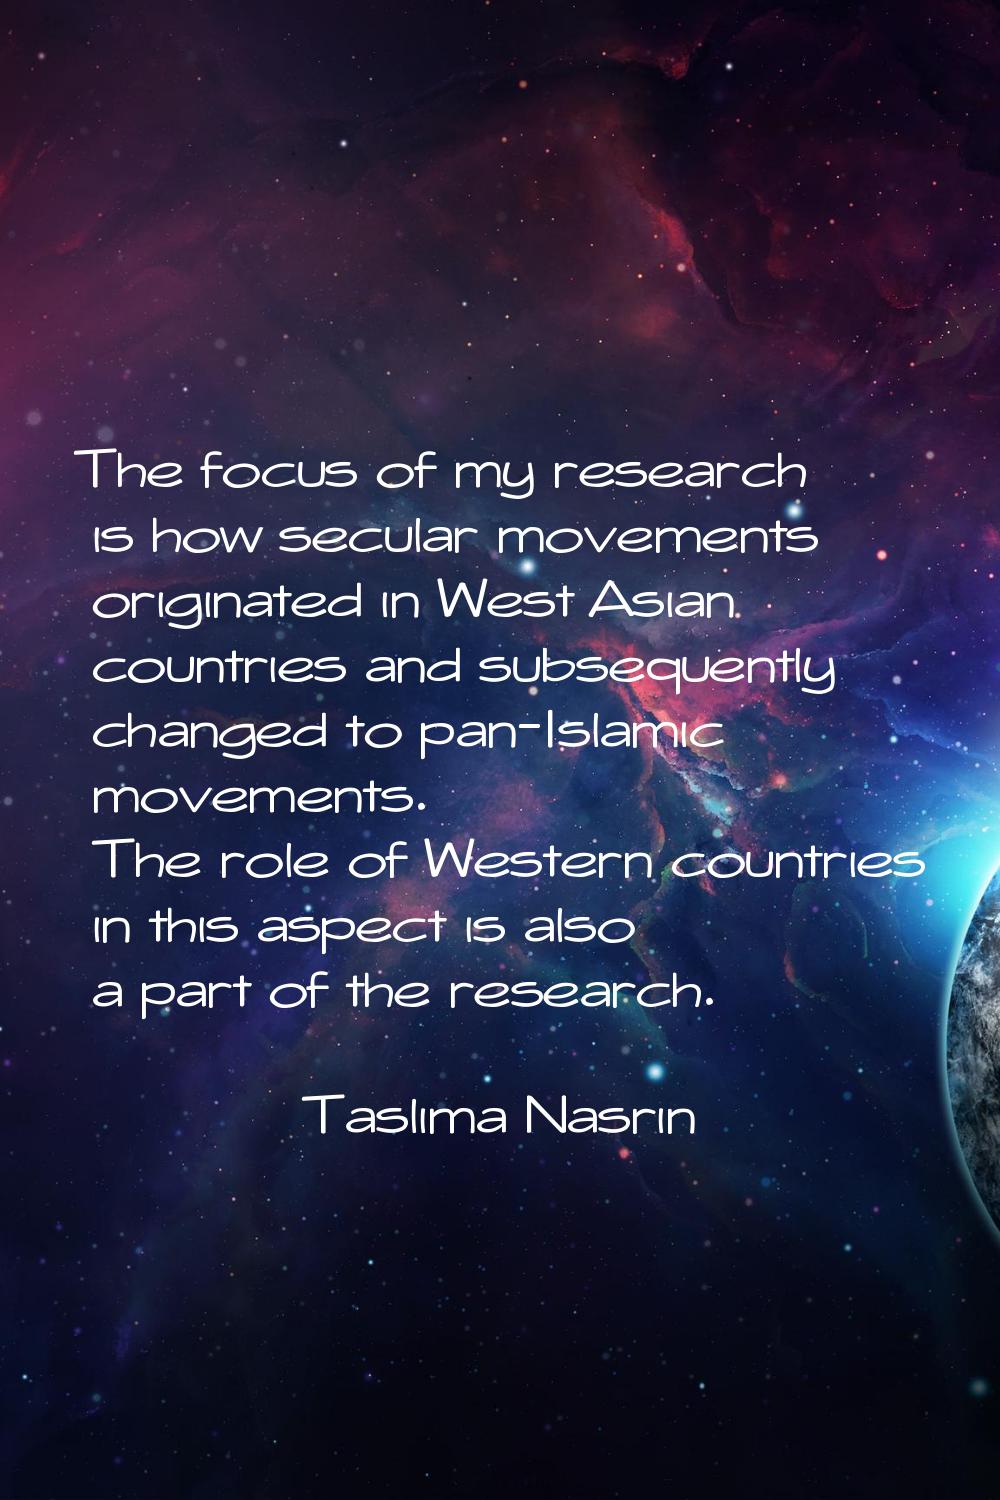 The focus of my research is how secular movements originated in West Asian countries and subsequent